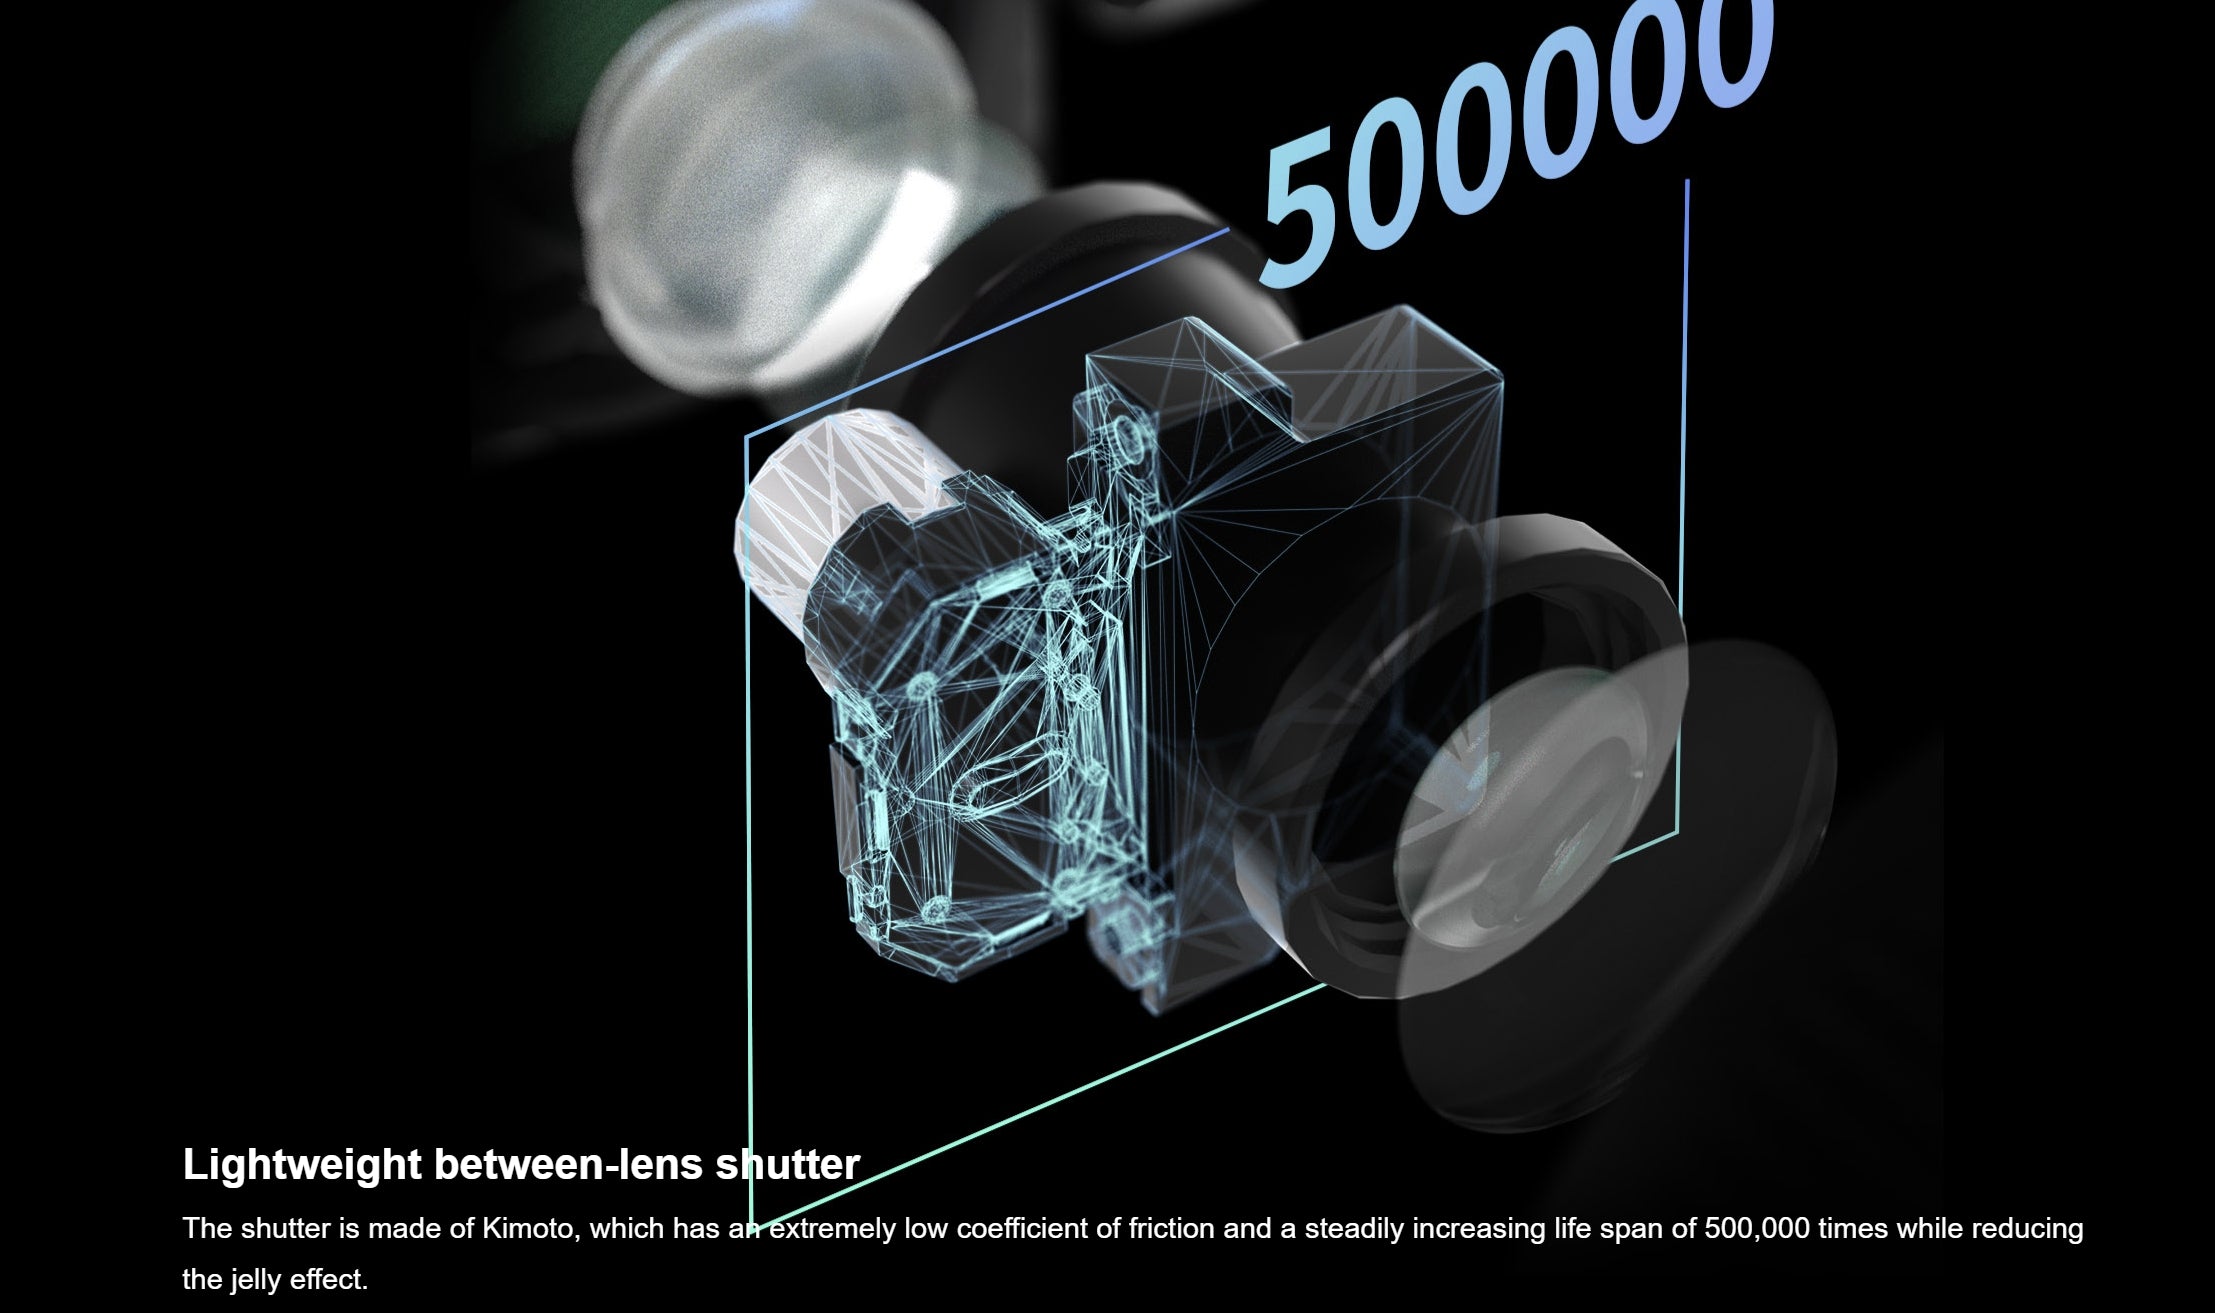 SHARE 6100X, Unique Kimoto design shutter reduces 'jelly effect' for sharp images with long lifespan.